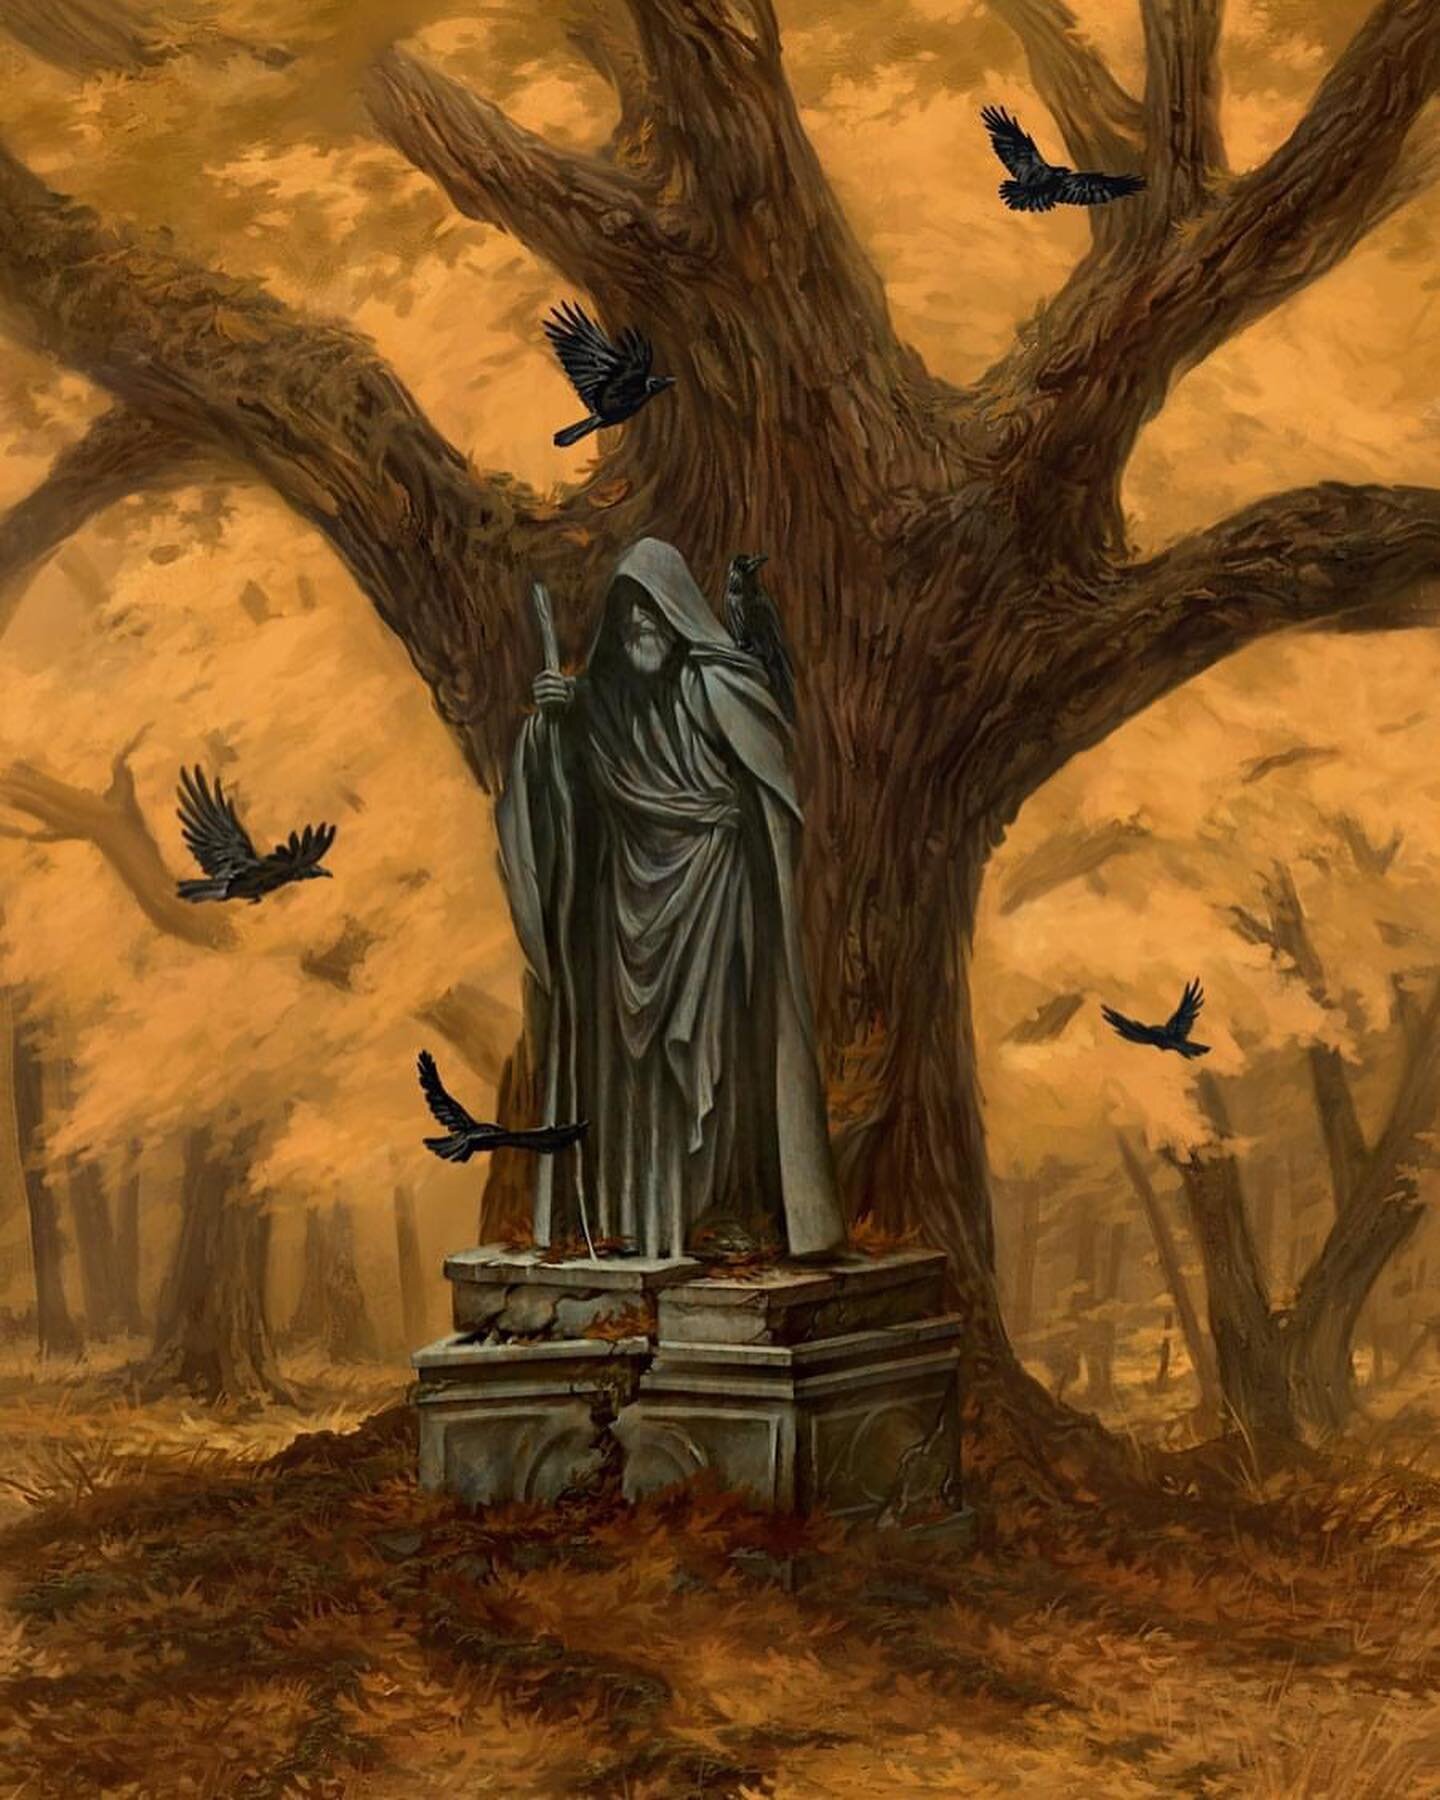 The Old Oak 
20 x 30. Digital

I visited the Old Oak today, seeking insight on the journey. Even upon fractured stone he remains balanced, his face etched with weathered storms. His emissaries sail among the branches, each beat of ebony wings echo wi